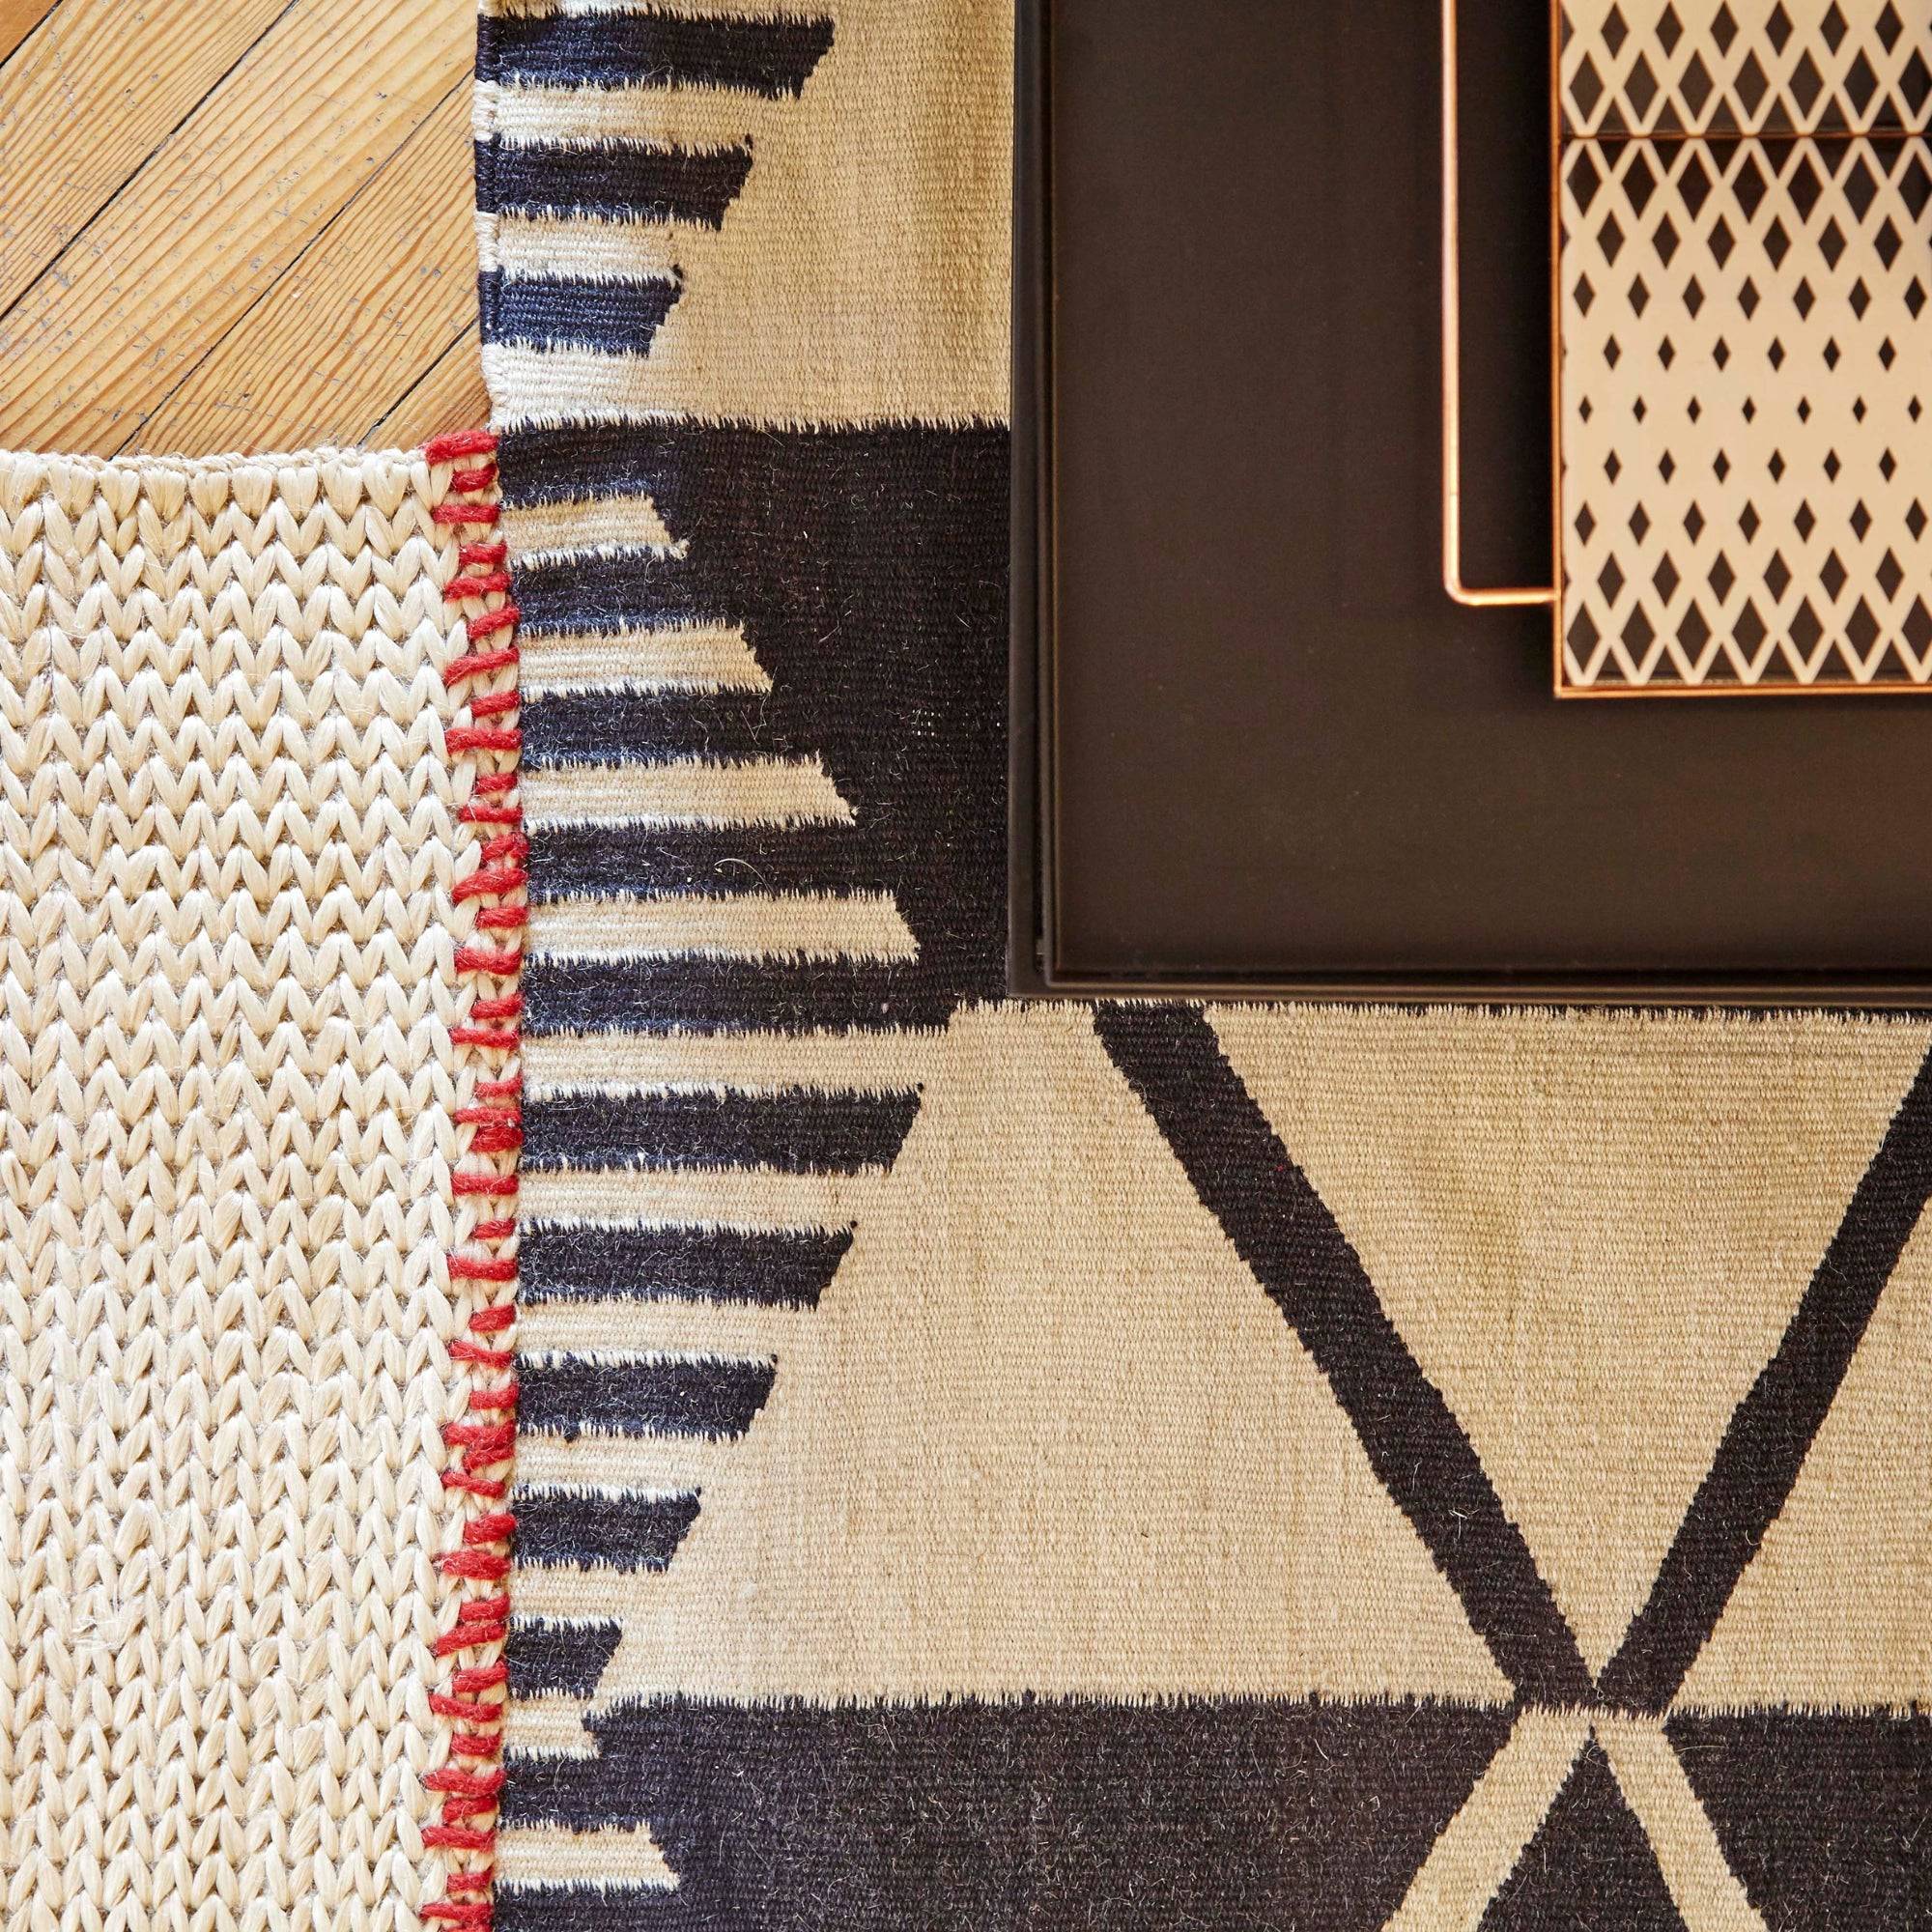 Rustic Chic Rug - THAT COOL LIVING